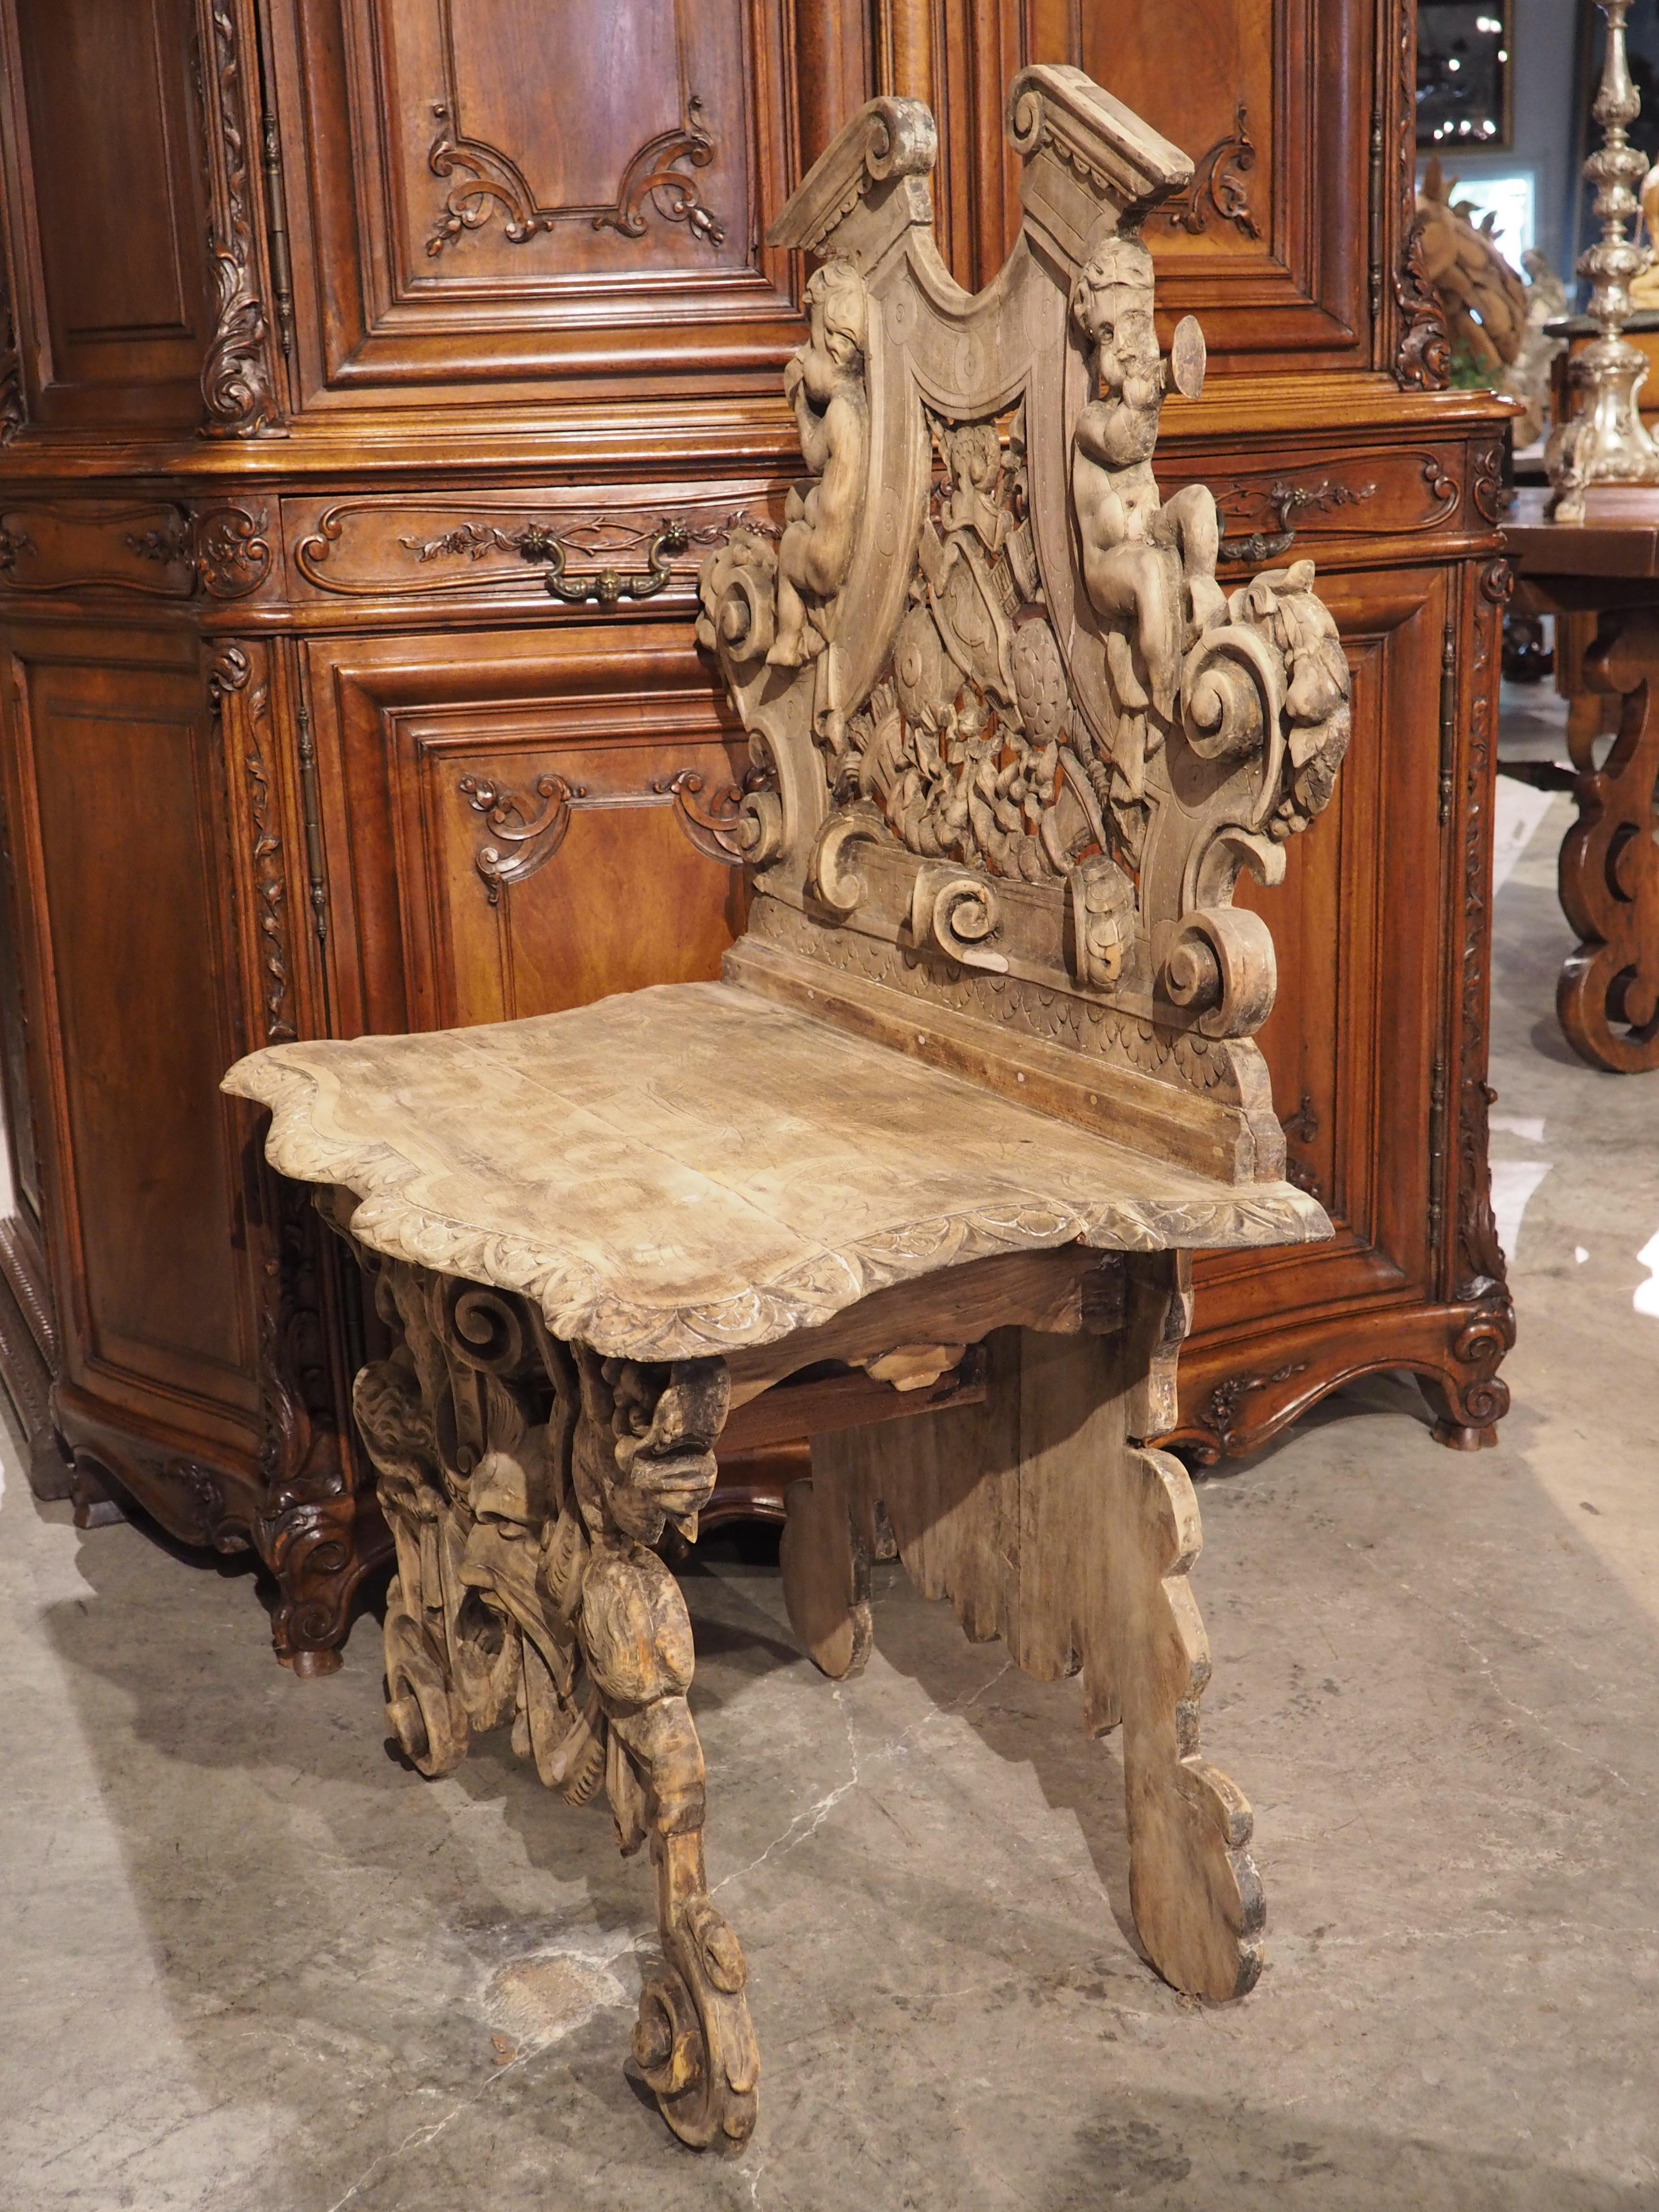 A sgabello is an Italian chair that originated in the Renaissance. Originally designed to be displayed in a hallway (like a French side chair), sgabello were typically highly carved with some sort of familial crest or coat of arms incorporated into